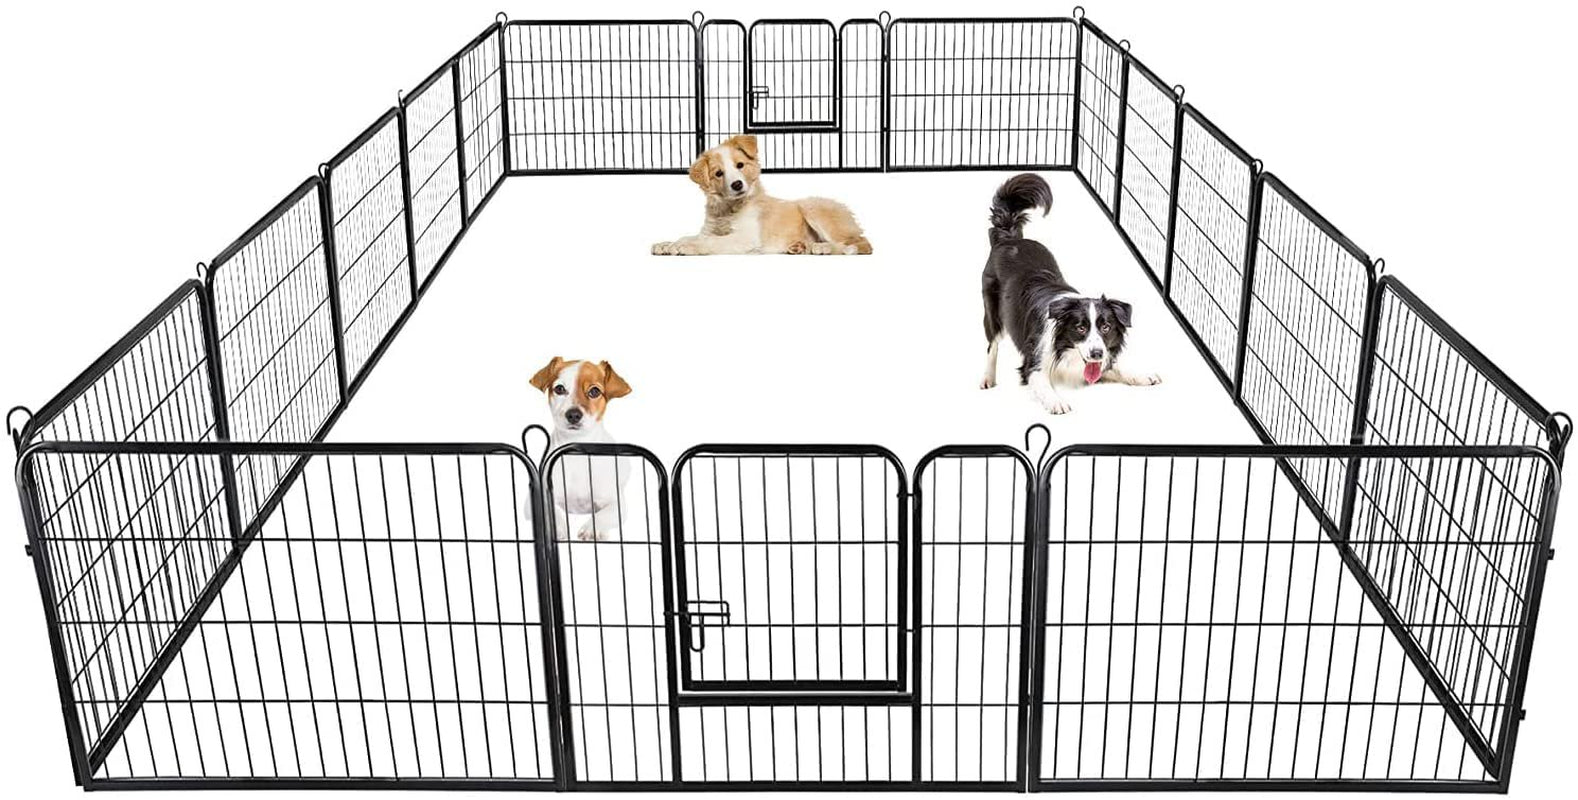 KOFUN Dog Playpen, Dog Pen Indoor Outdoor, Portable Metal Pet Playpen, Cat Exercise Fence Barrier Kennel, Pet Fence Gate with Doors for Large/Medium/Small Pets, Exercise Pen for Yard, 16 Panels